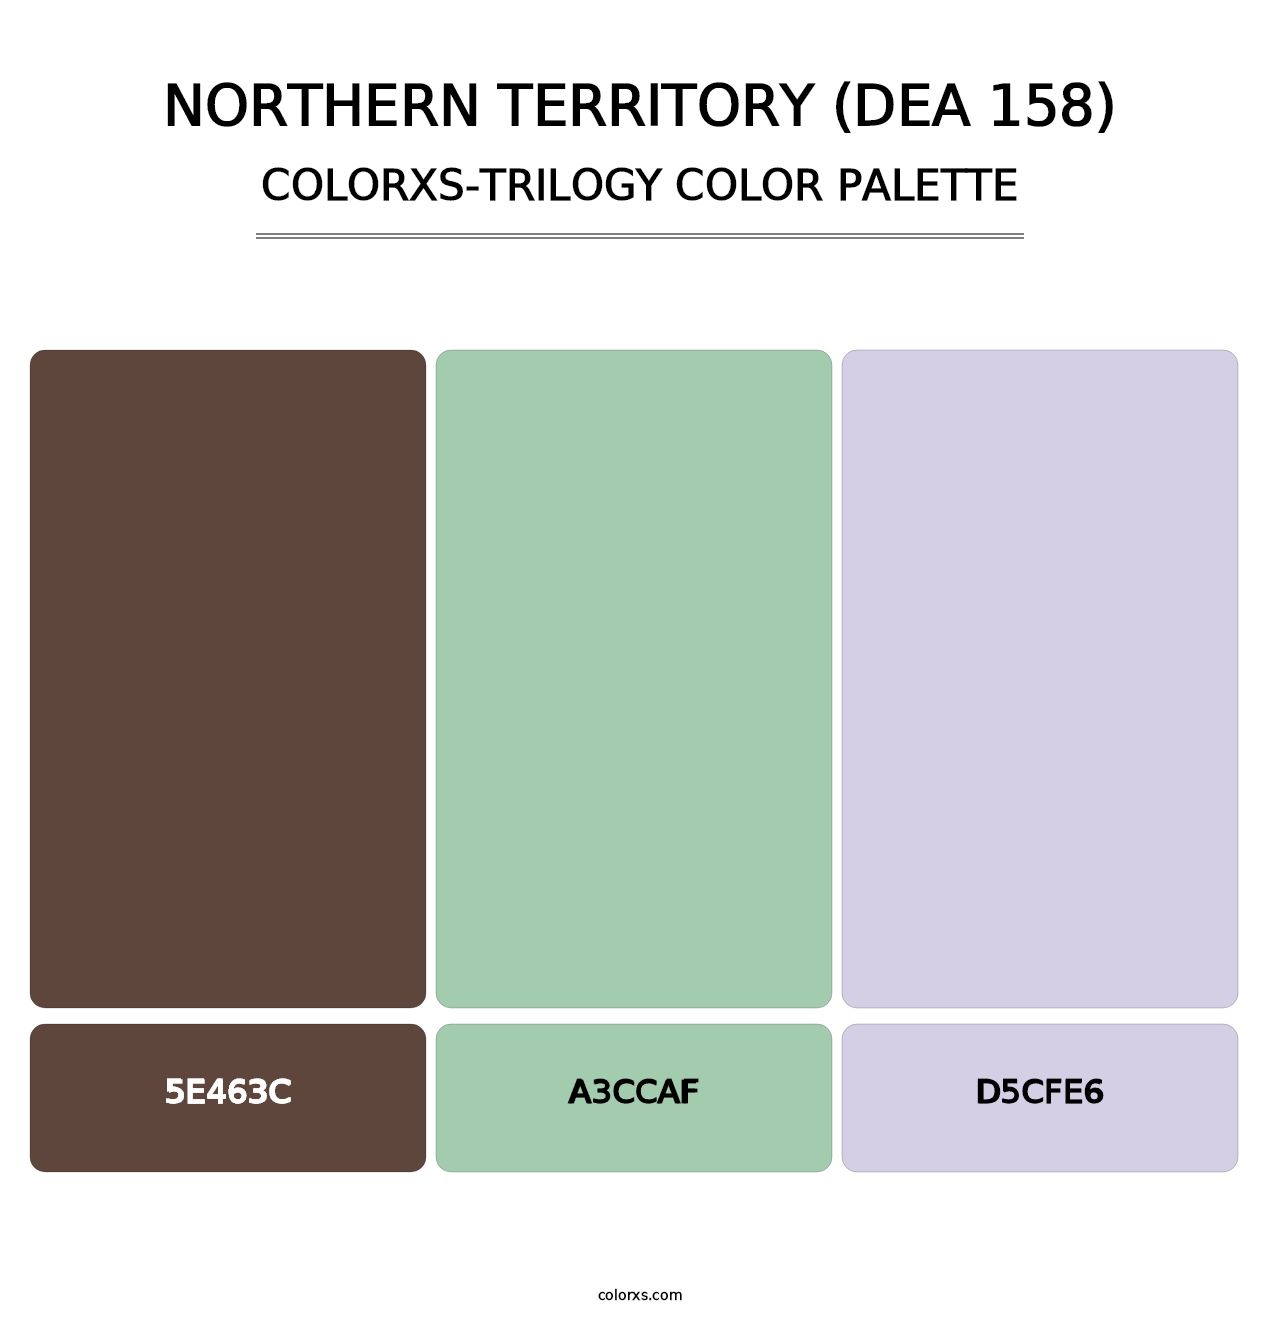 Northern Territory (DEA 158) - Colorxs Trilogy Palette